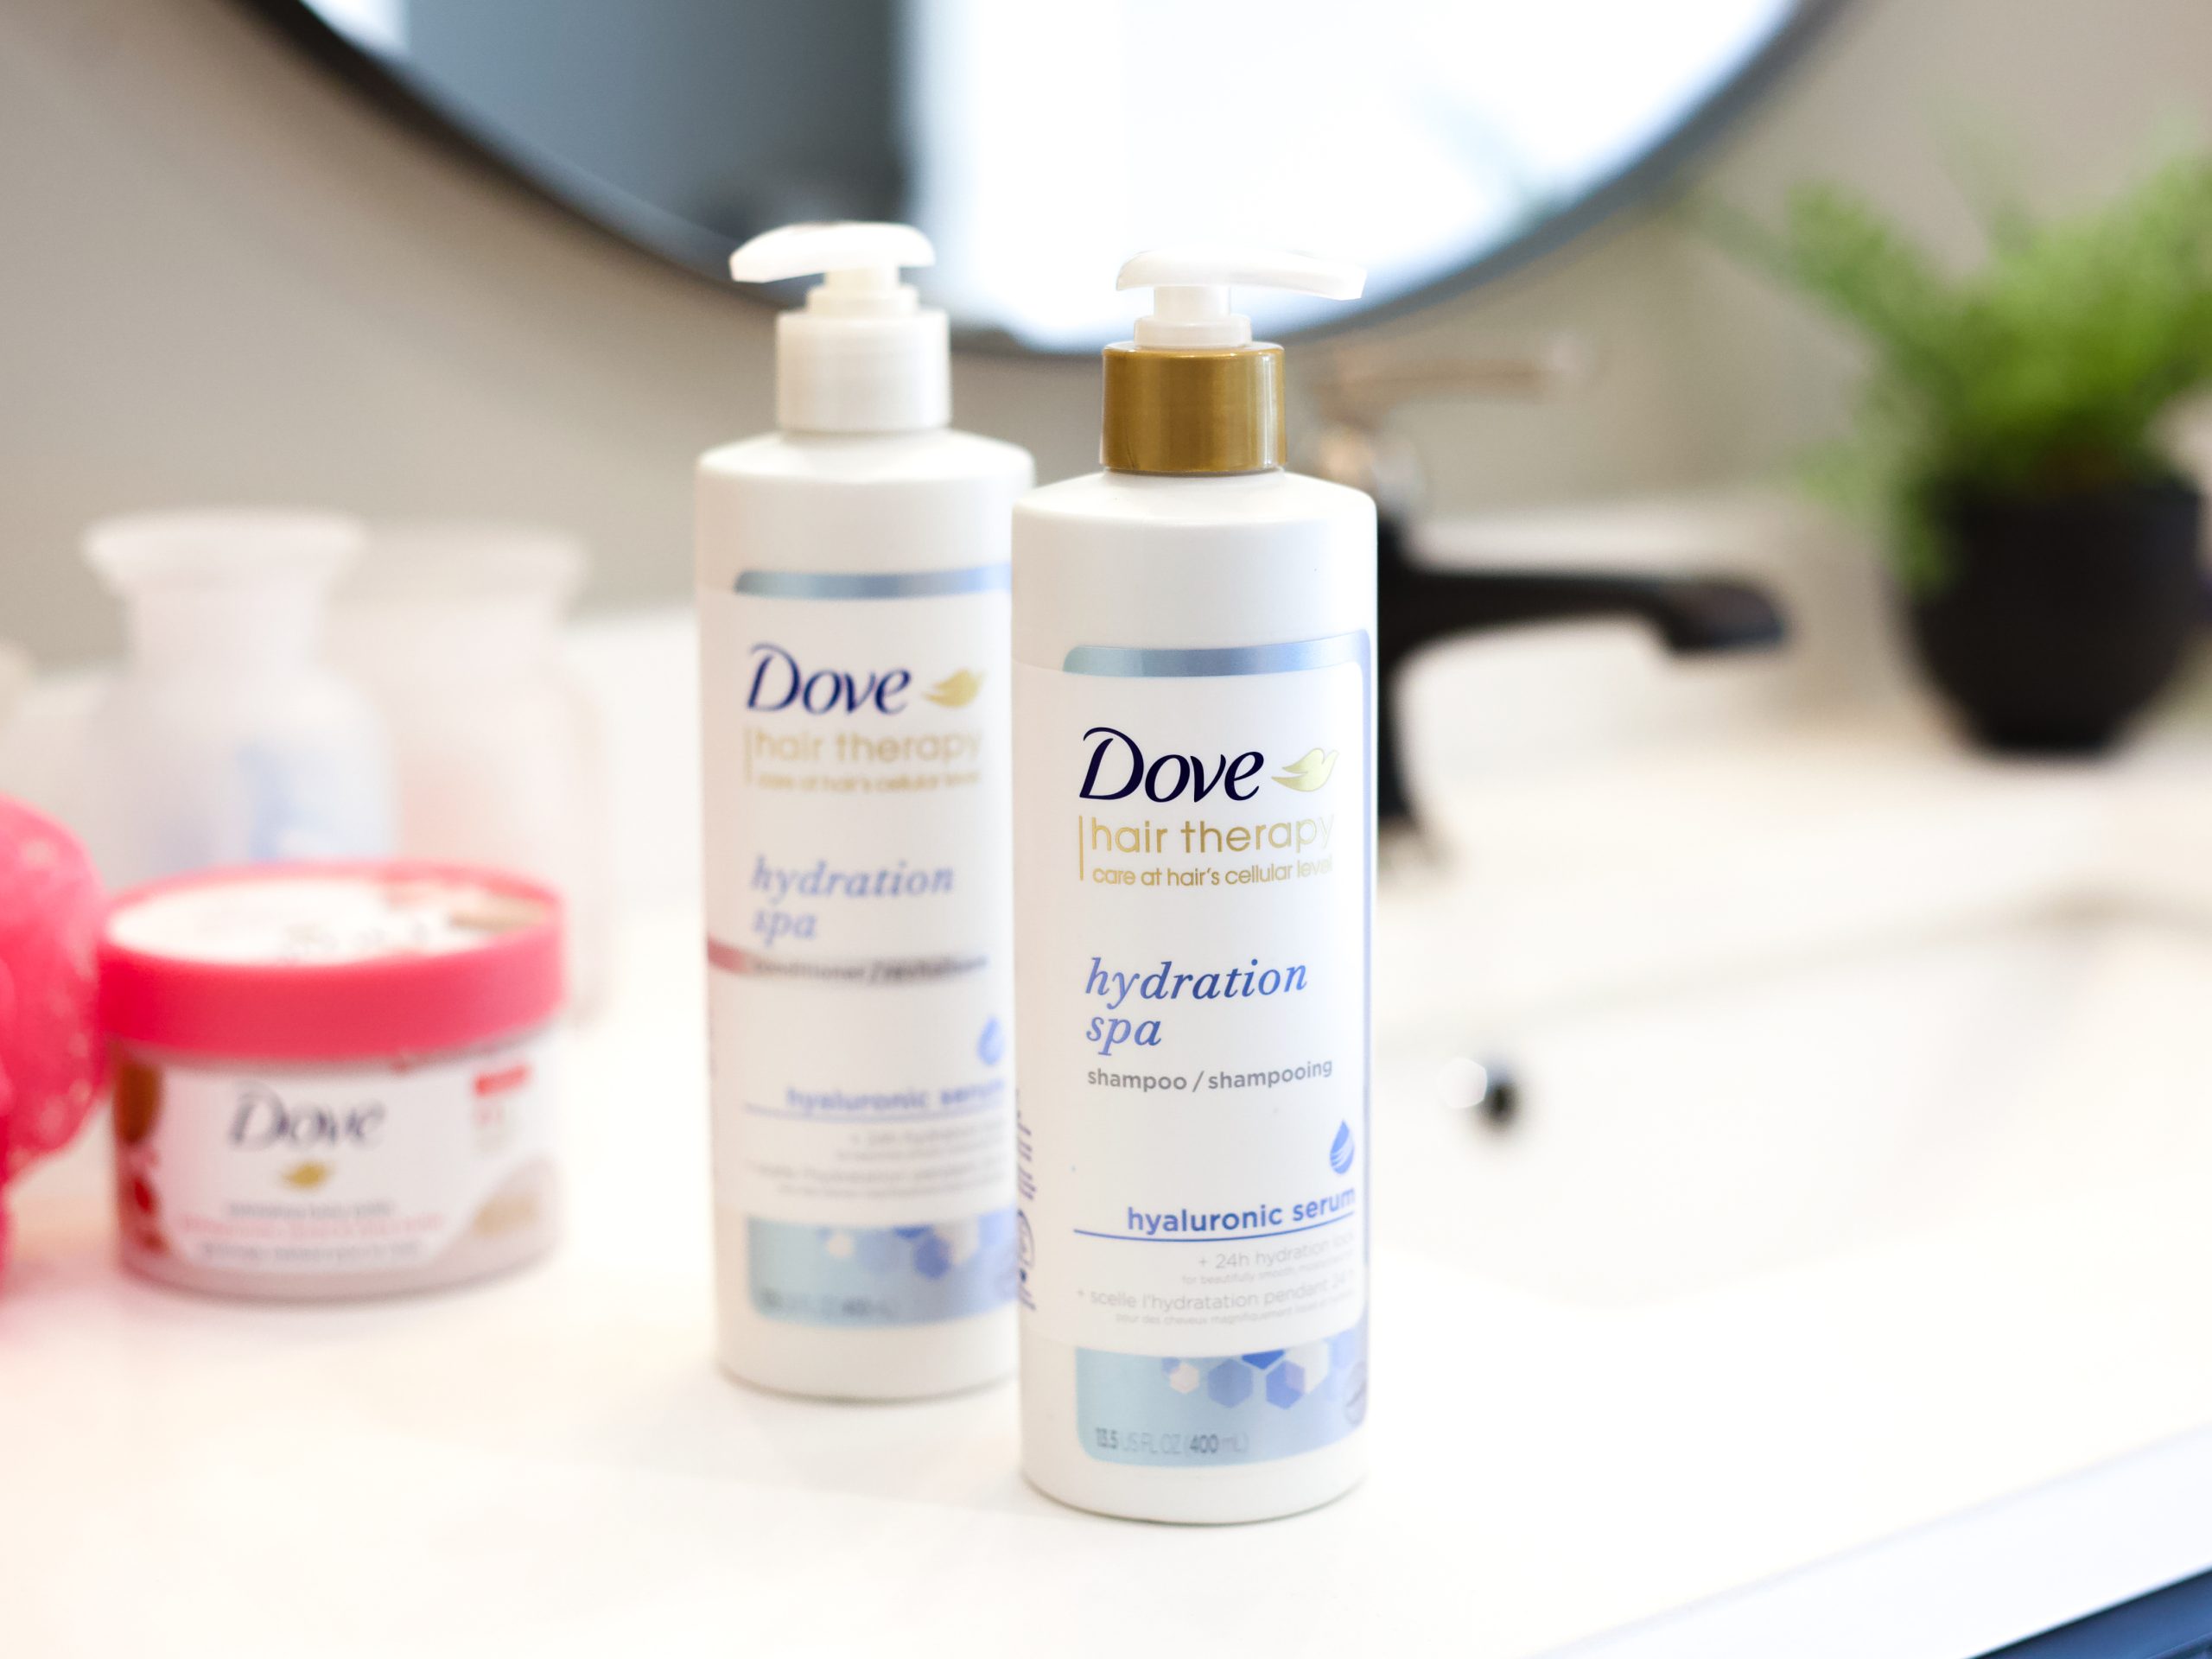 Dove Hair Therapy Shampoo or Conditioner As Low As $3.50 At Publix (Less Than Half Price) on I Heart Publix